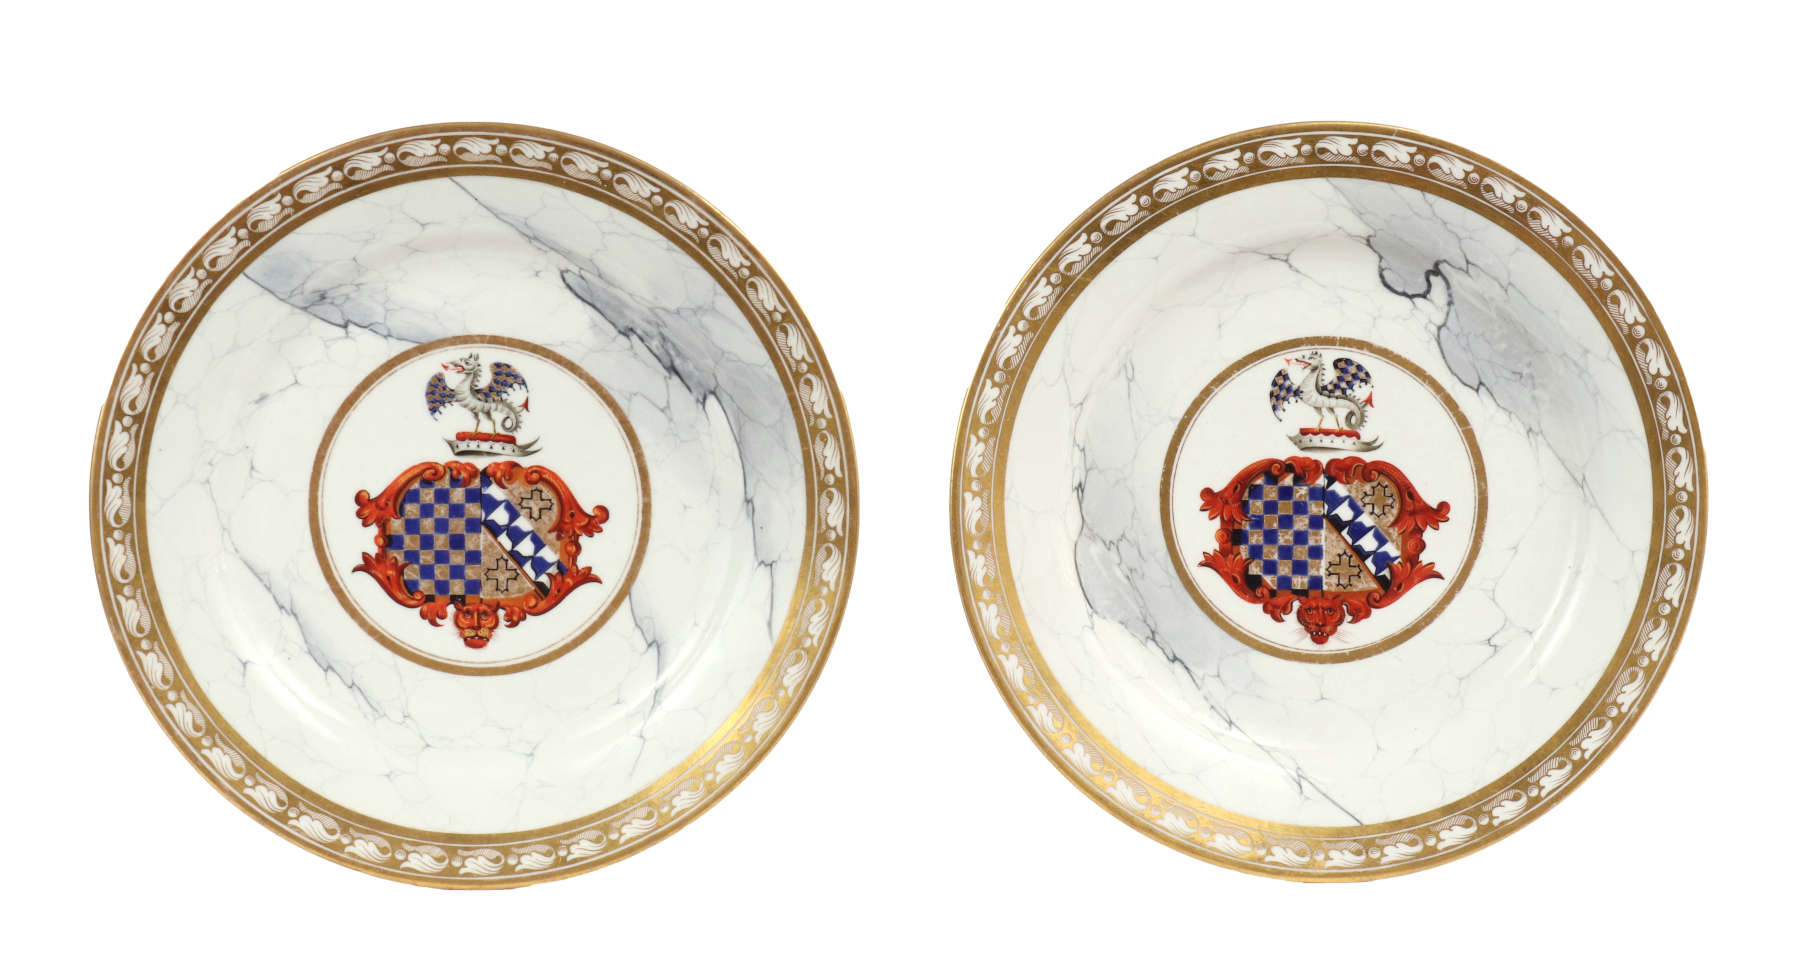 Pair of Barr, Flight & Barr Worcester Armorial Plates, c. 1810